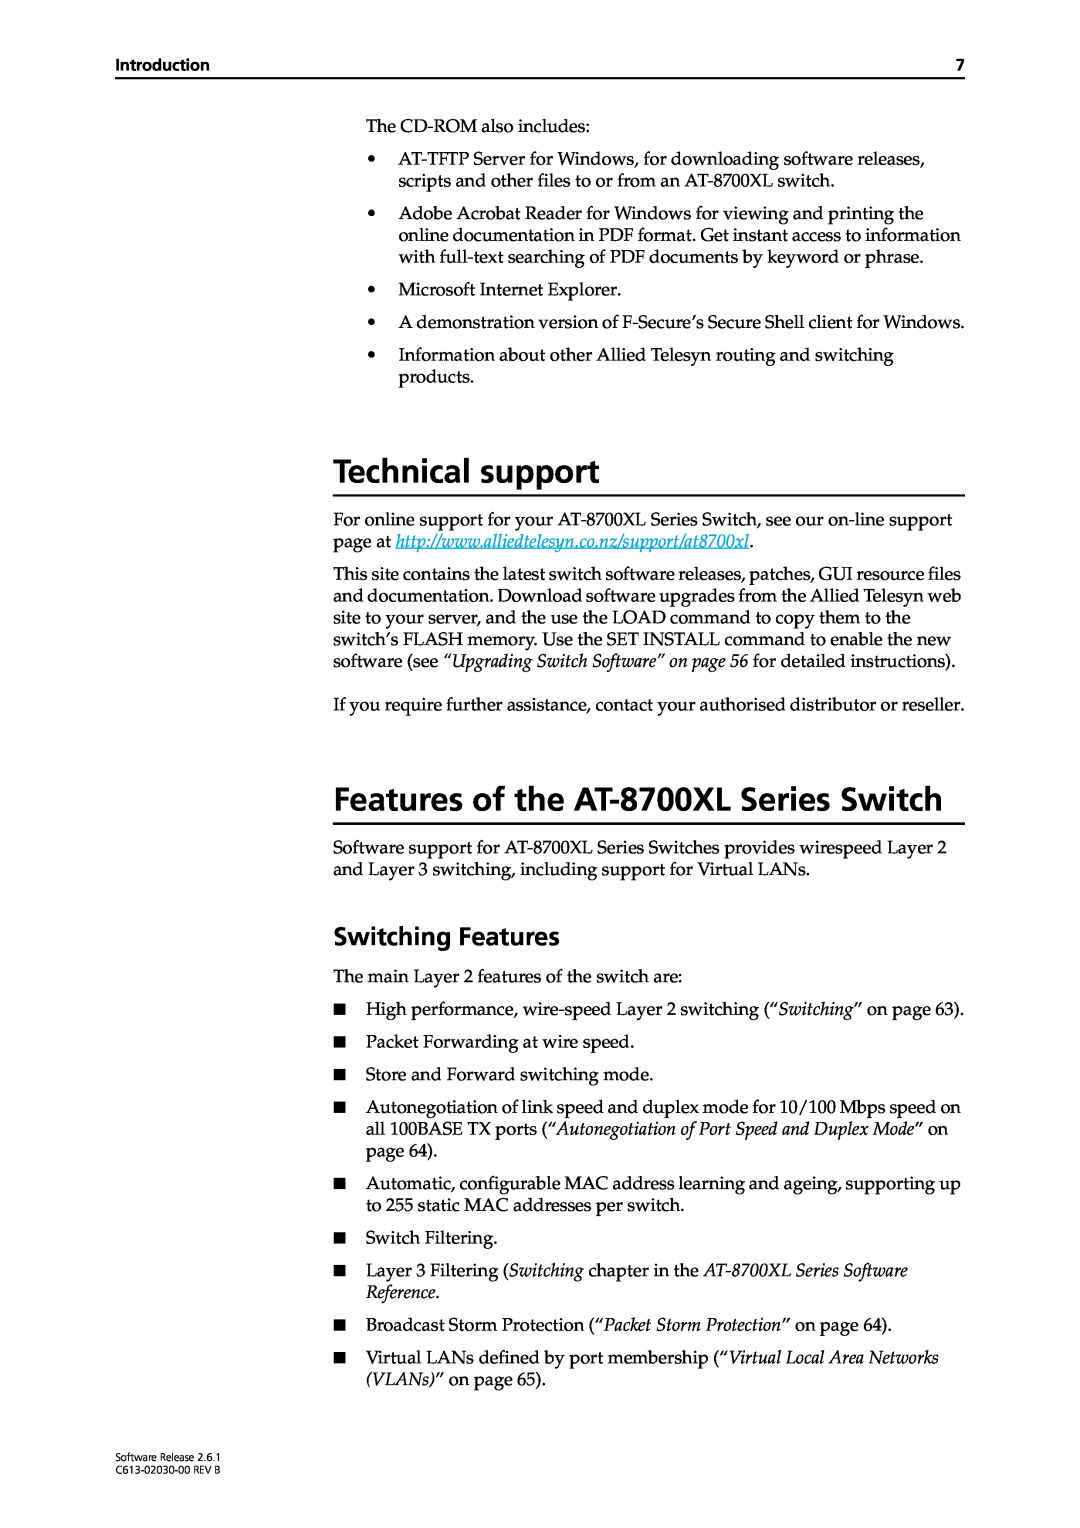 Allied Telesis at-8700xl series switch Technical support, Features of the AT-8700XL Series Switch, Switching Features 